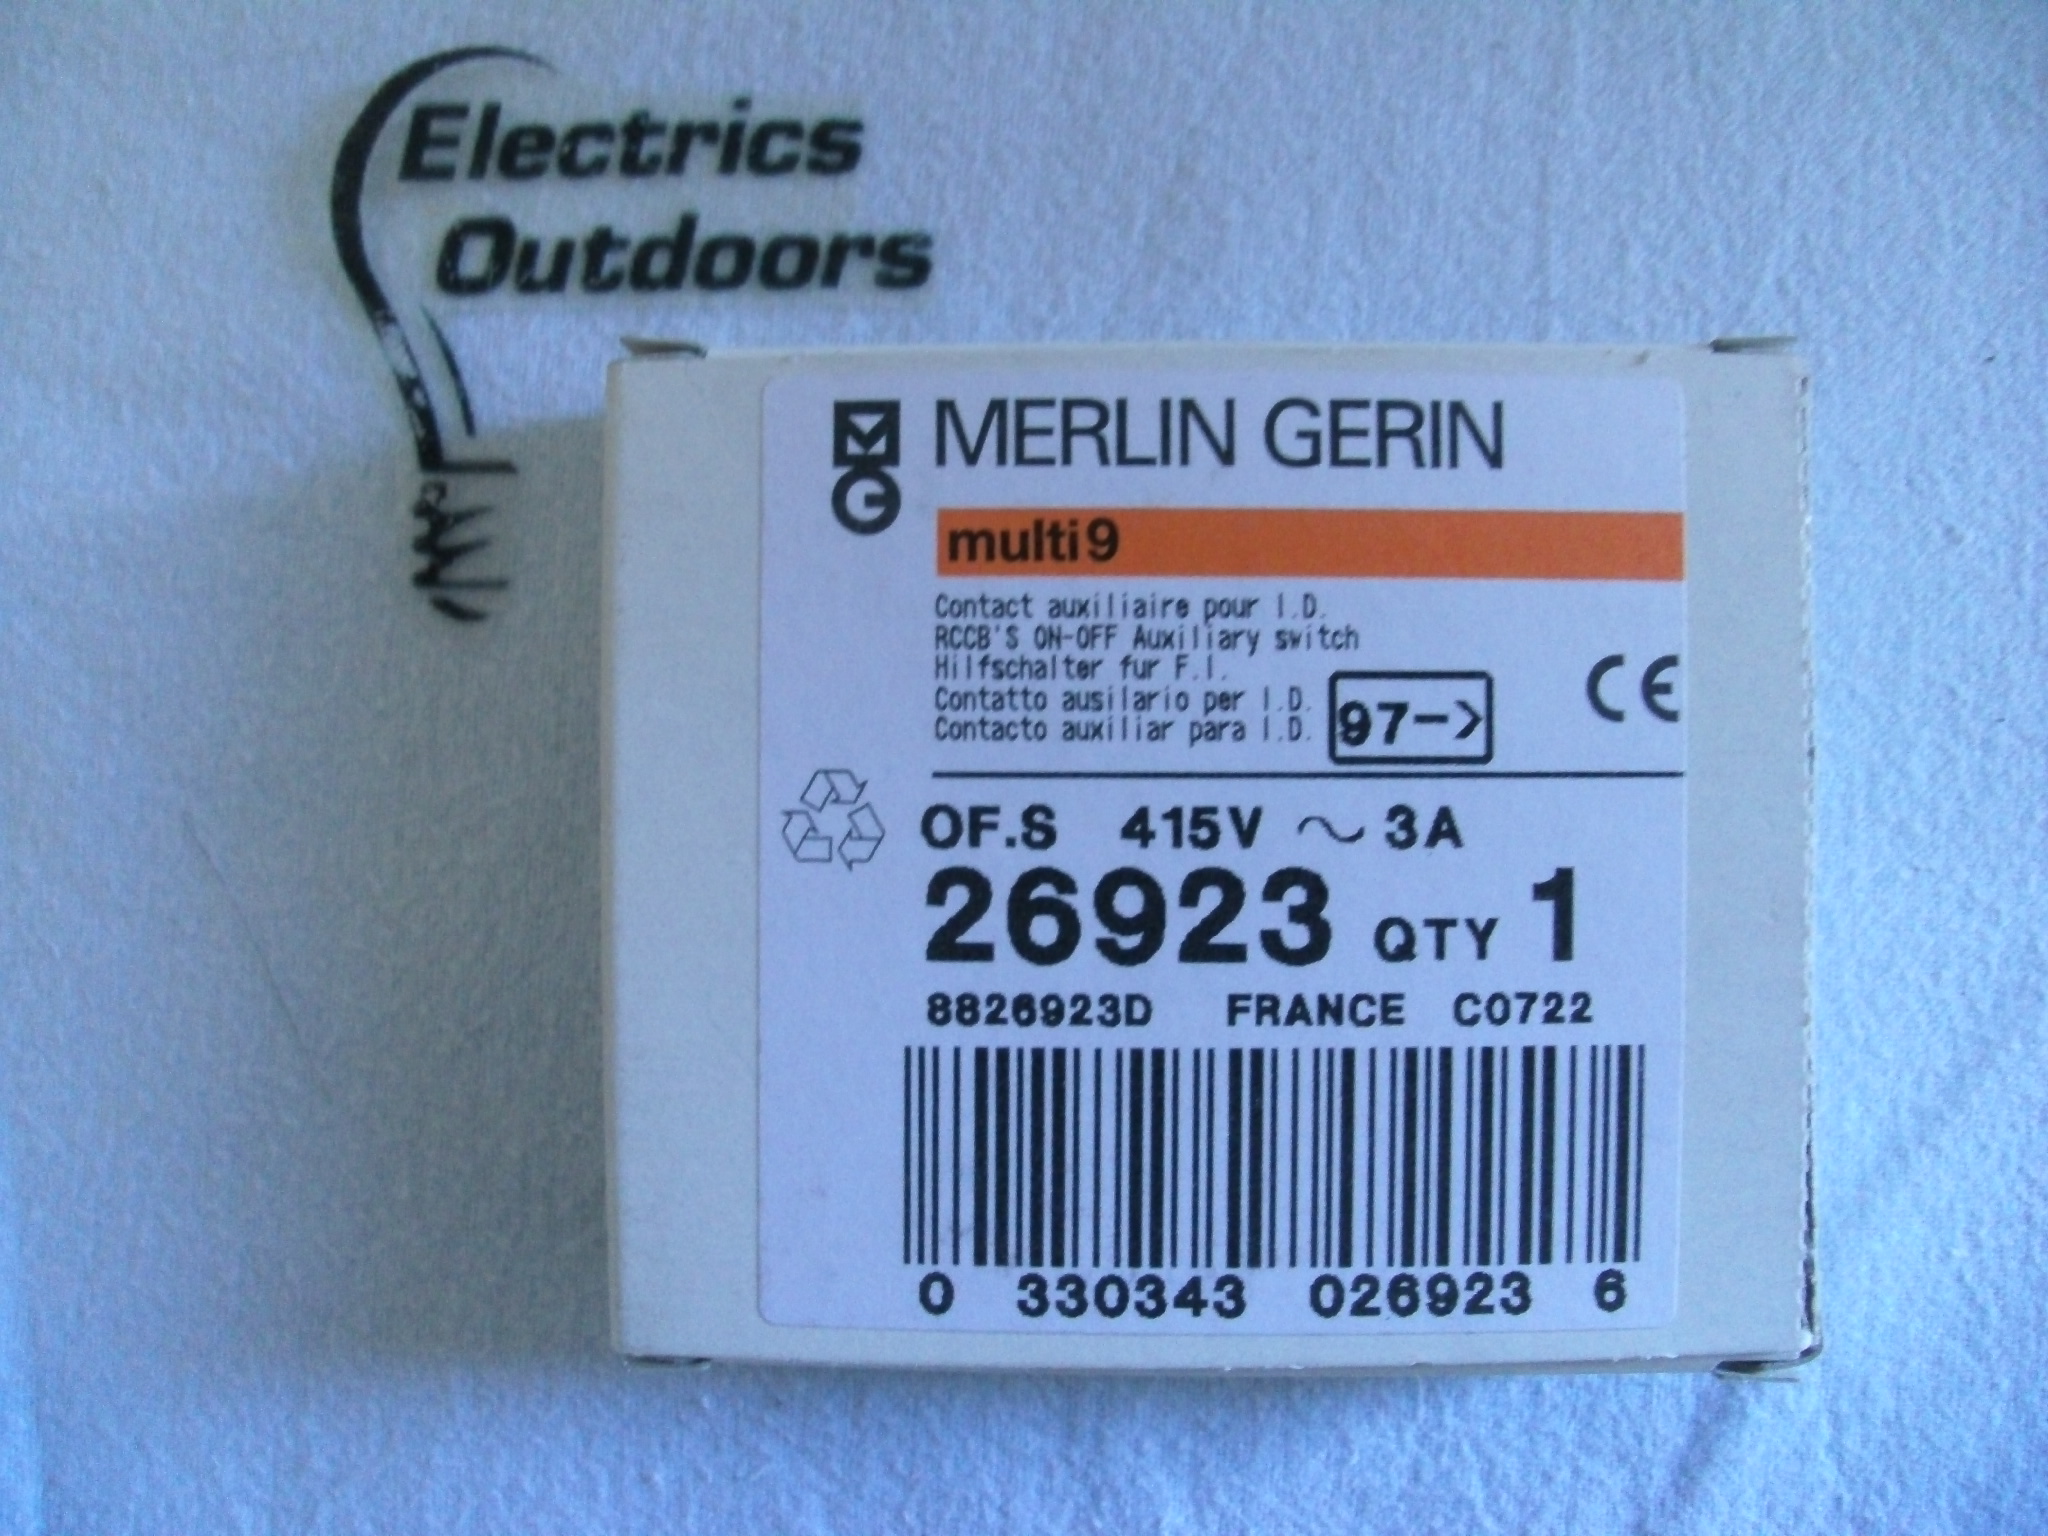 MERLIN GERIN 3 AMP RCCB ON OFF AUXILIARY SWITCH 415V 26923 MULTI 9